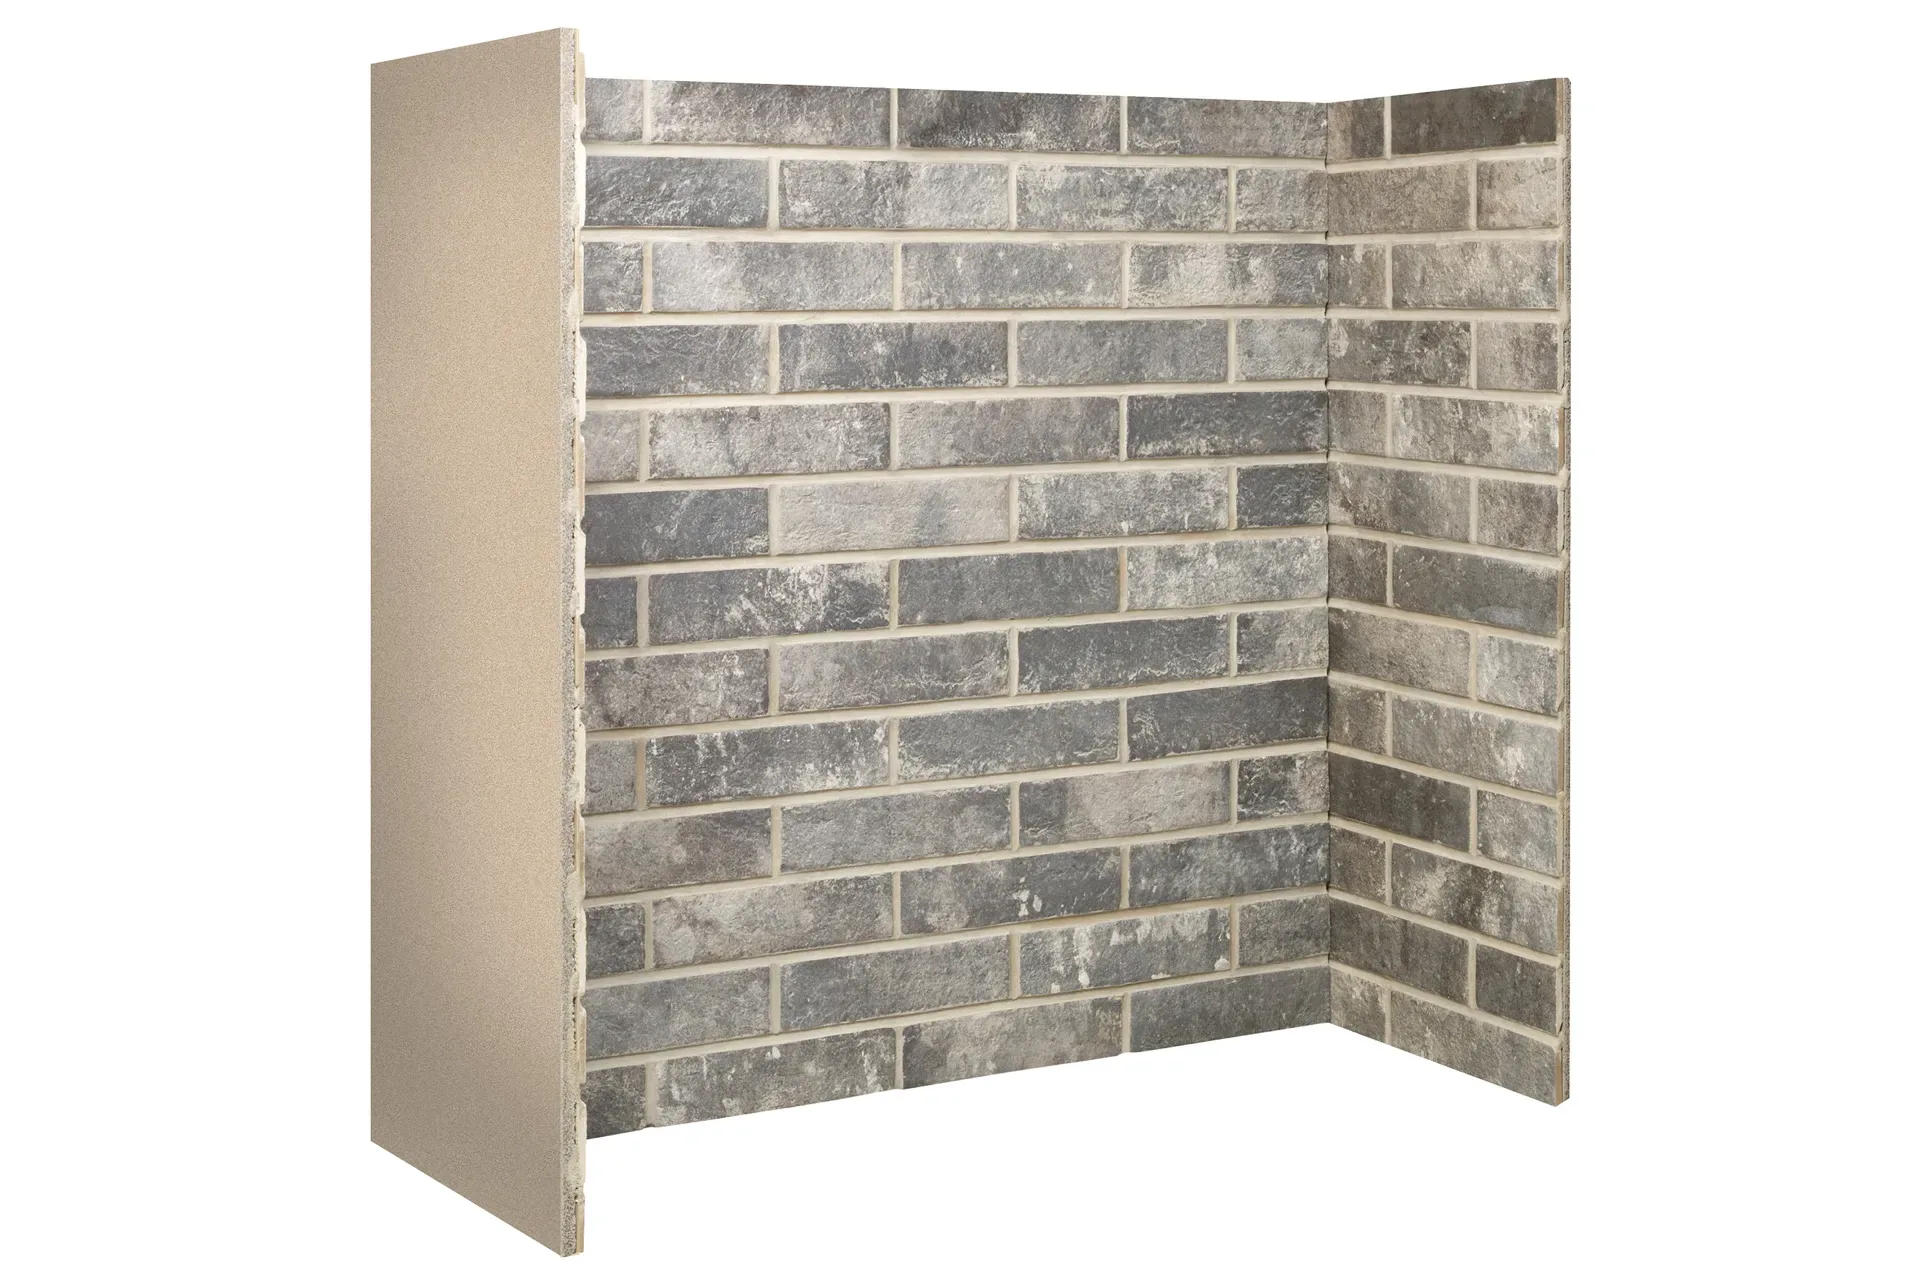 The Gallery Collection GREY CERAMIC BRICK Chamber